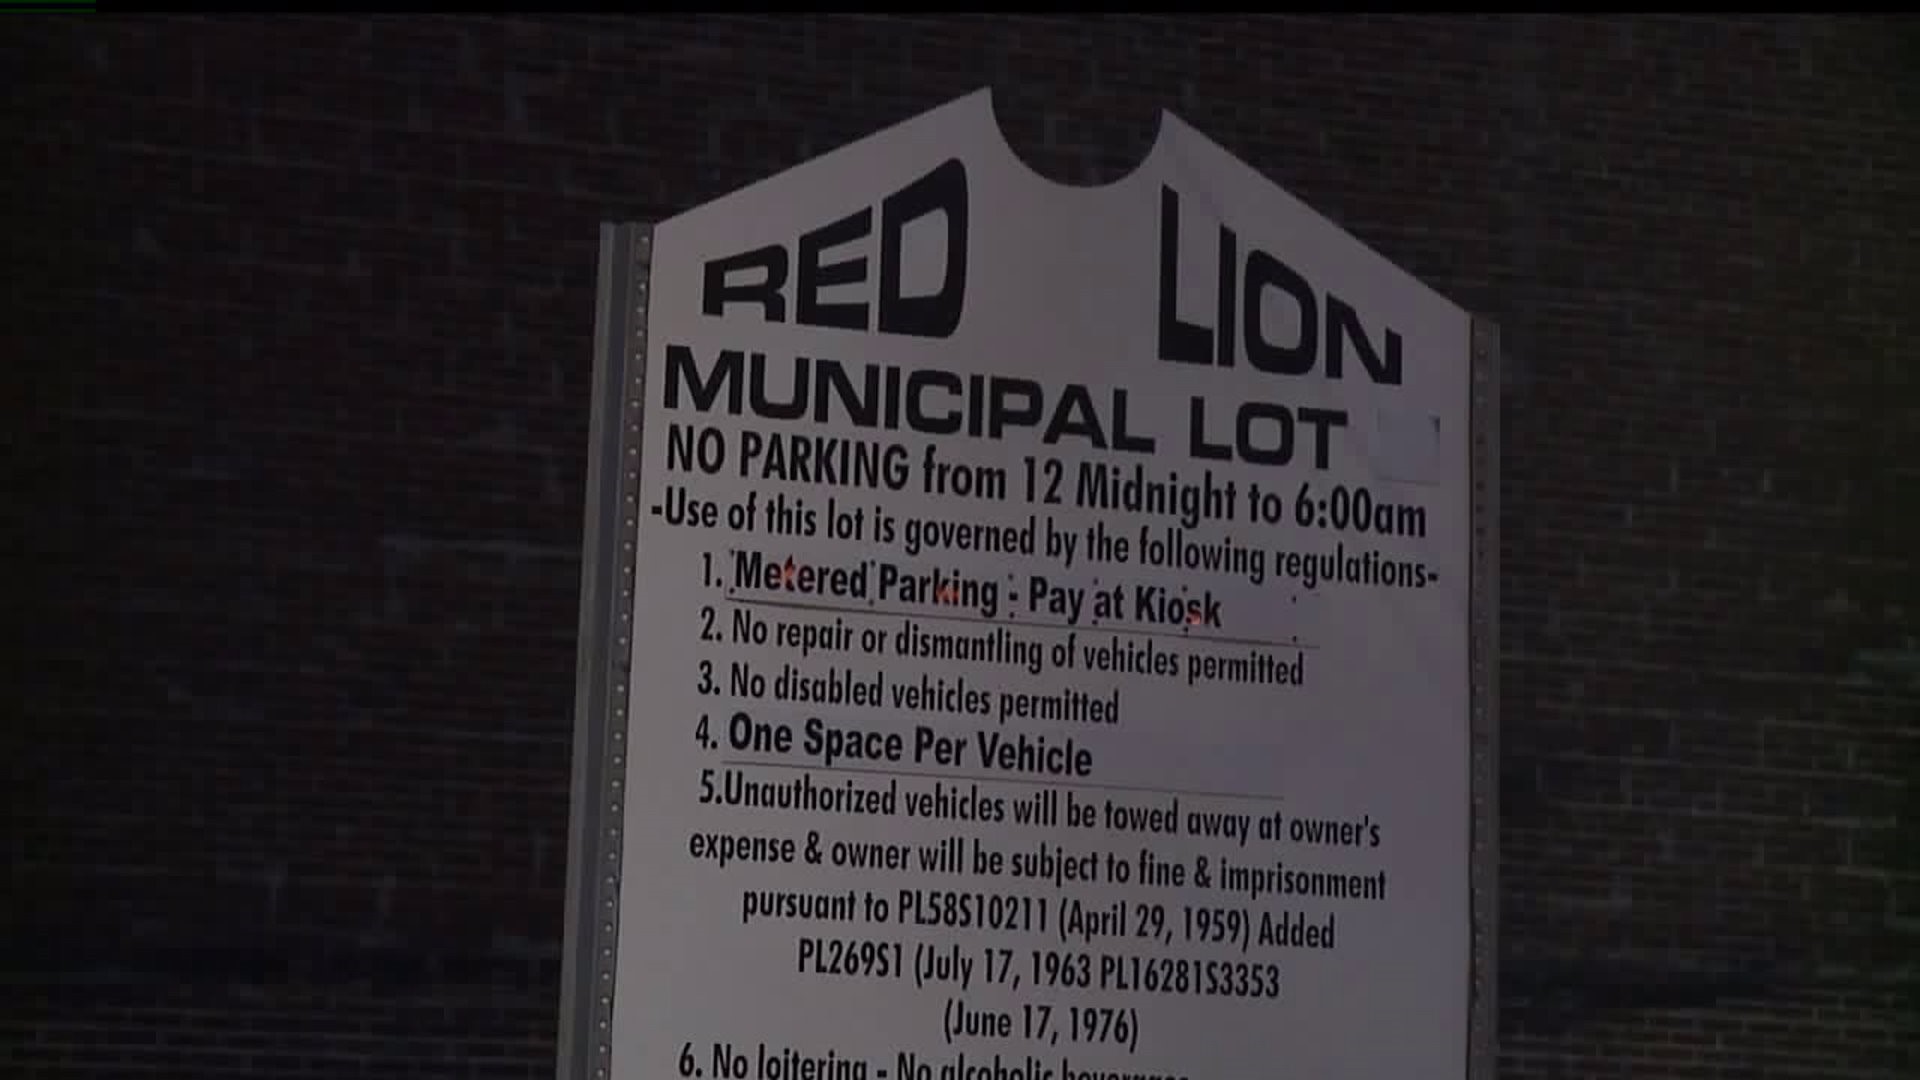 Red Lion eminent domain meeting